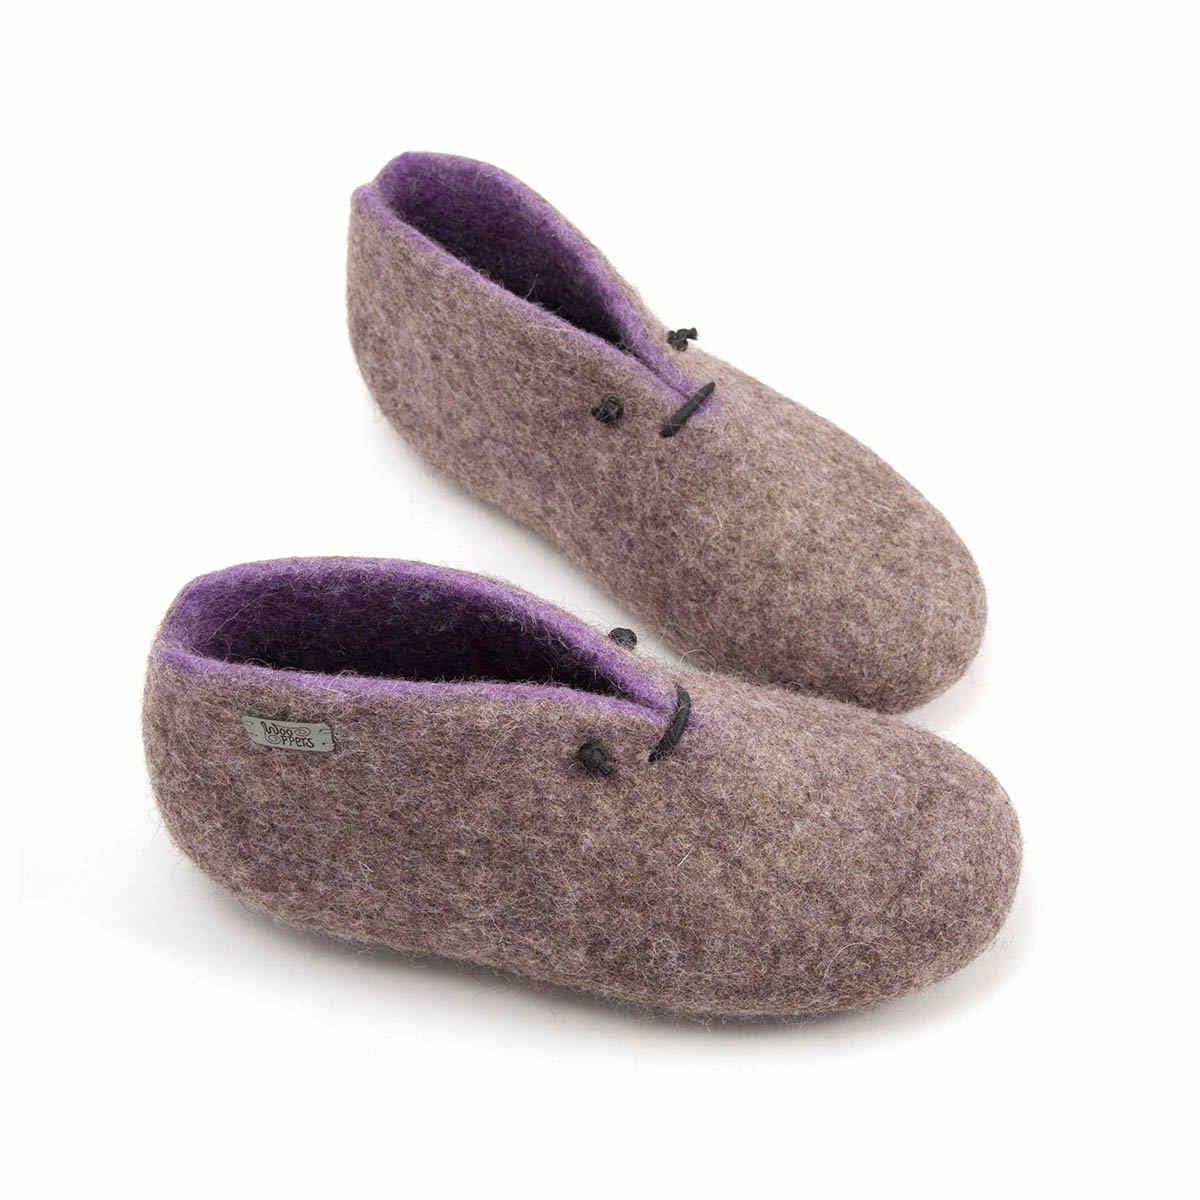 Wool Booties in grey and lilac Women's Slippers, Women's Slippers, BOOTIES